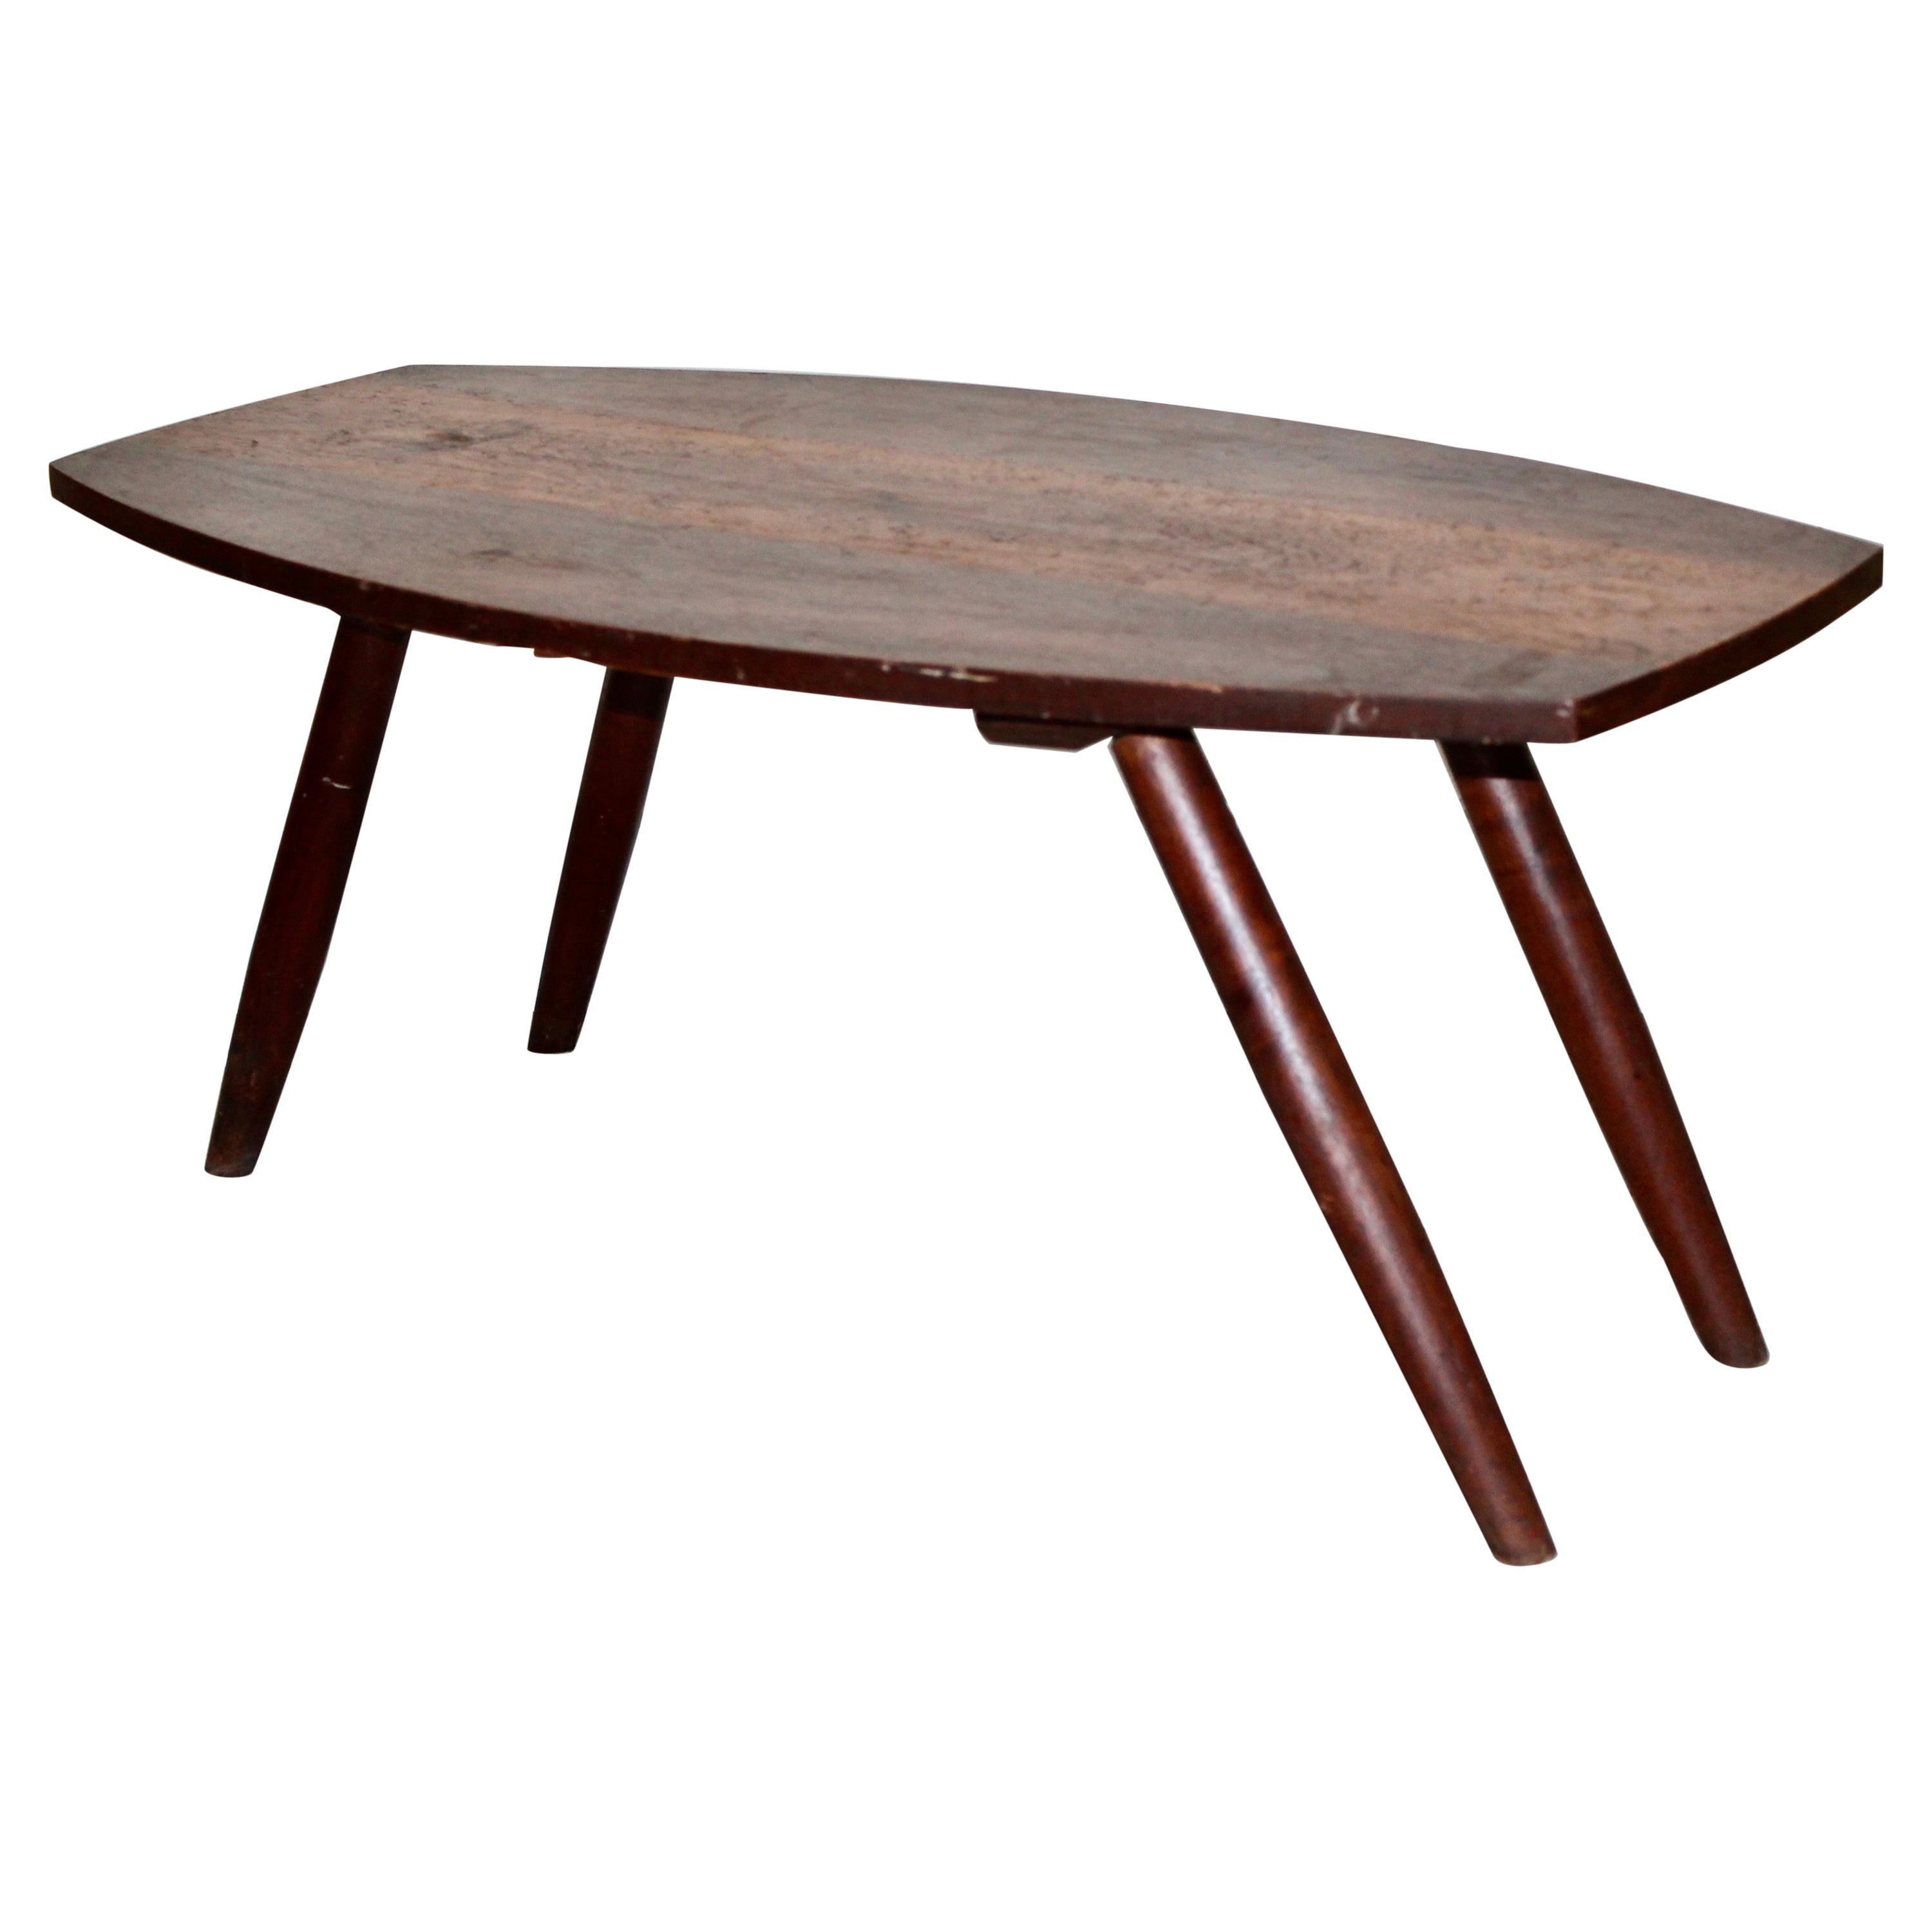 Early George Nakashima 'Turned Leg' Coffee Table For Sale